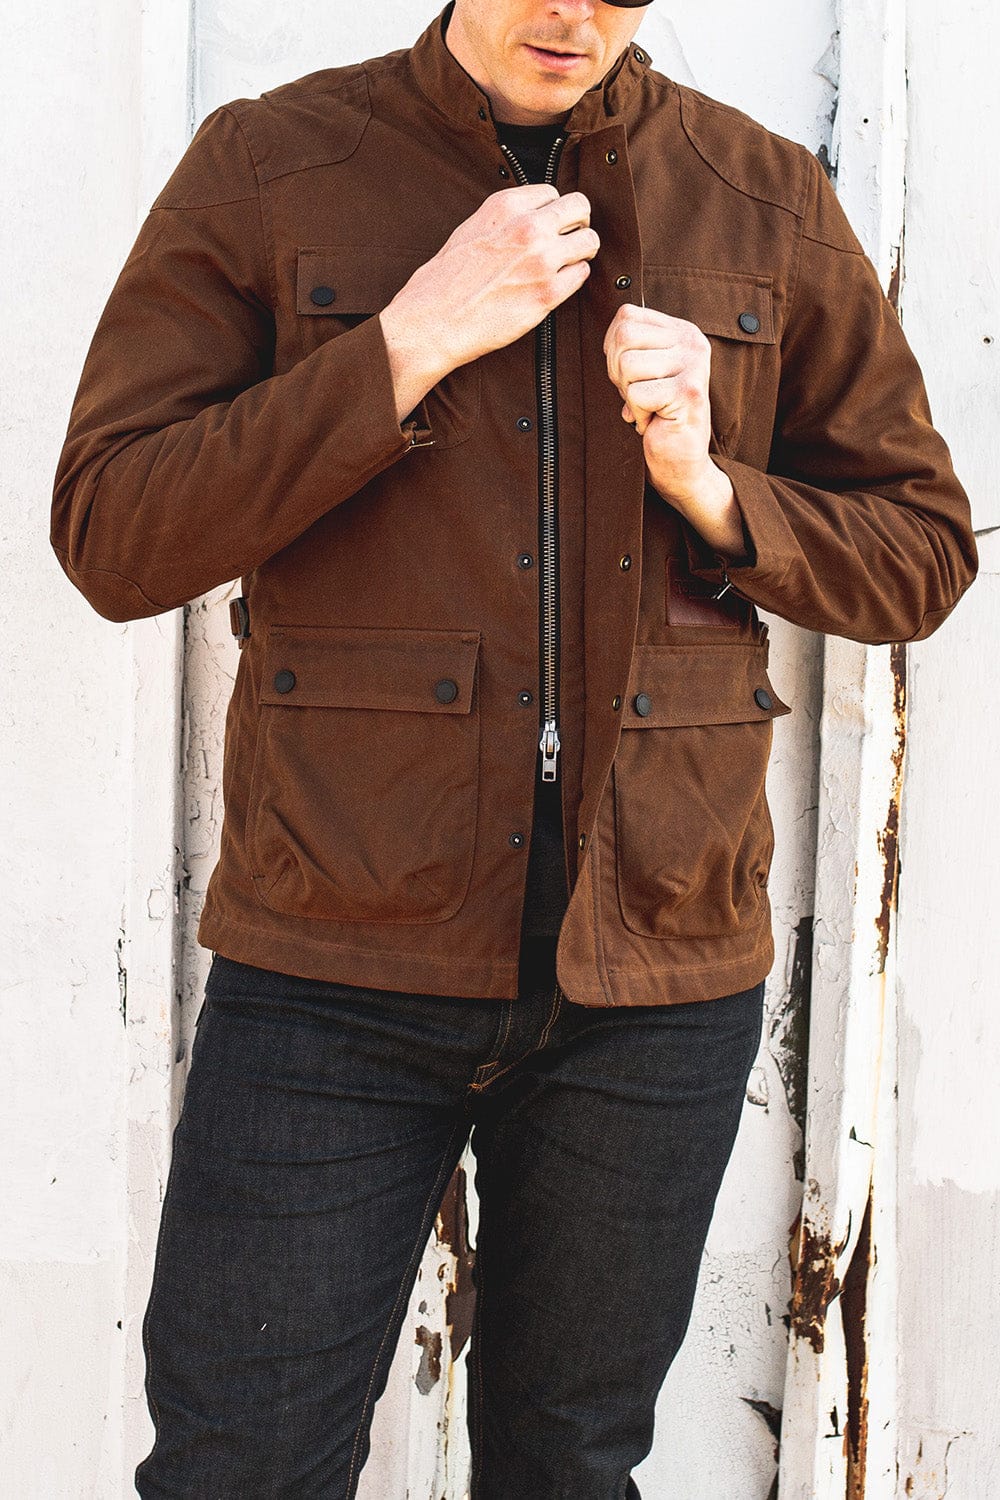 The McCoy Waxed Canvas Protective Elbow Motorwear D3O® and - - Pockets Shoulder Brown. Armor Jacket Back, for Tobacco